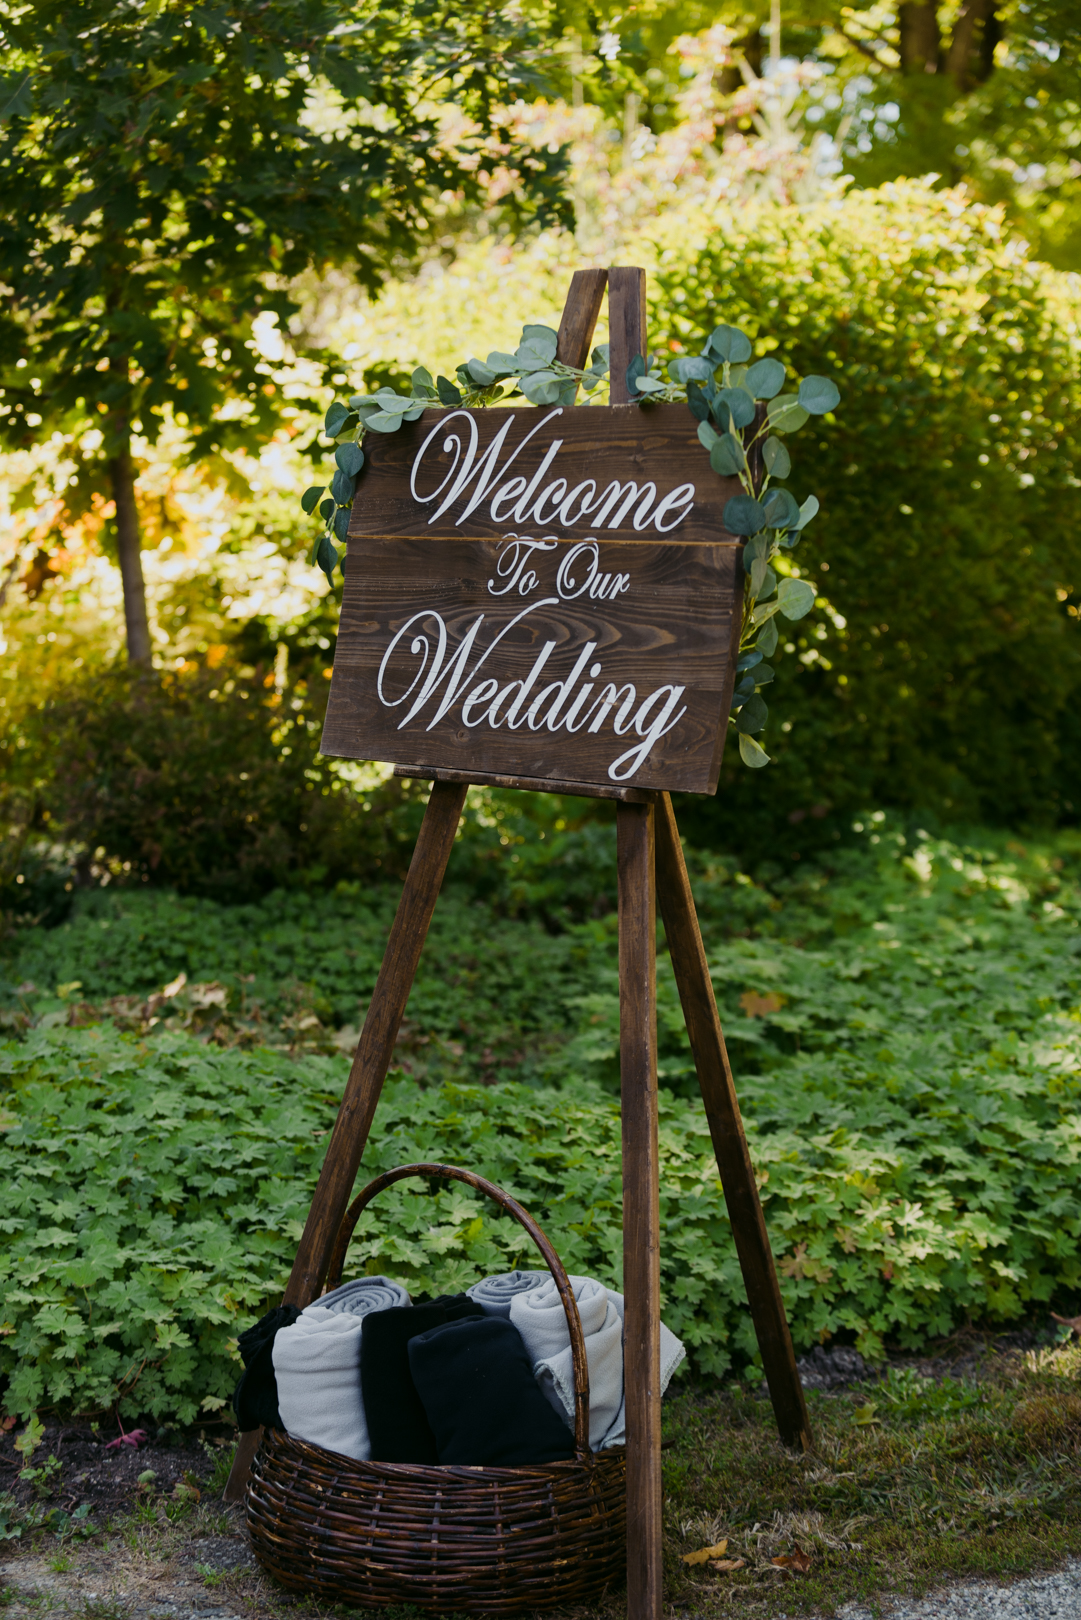 welcome to our wedding wooden sign with blanket basket